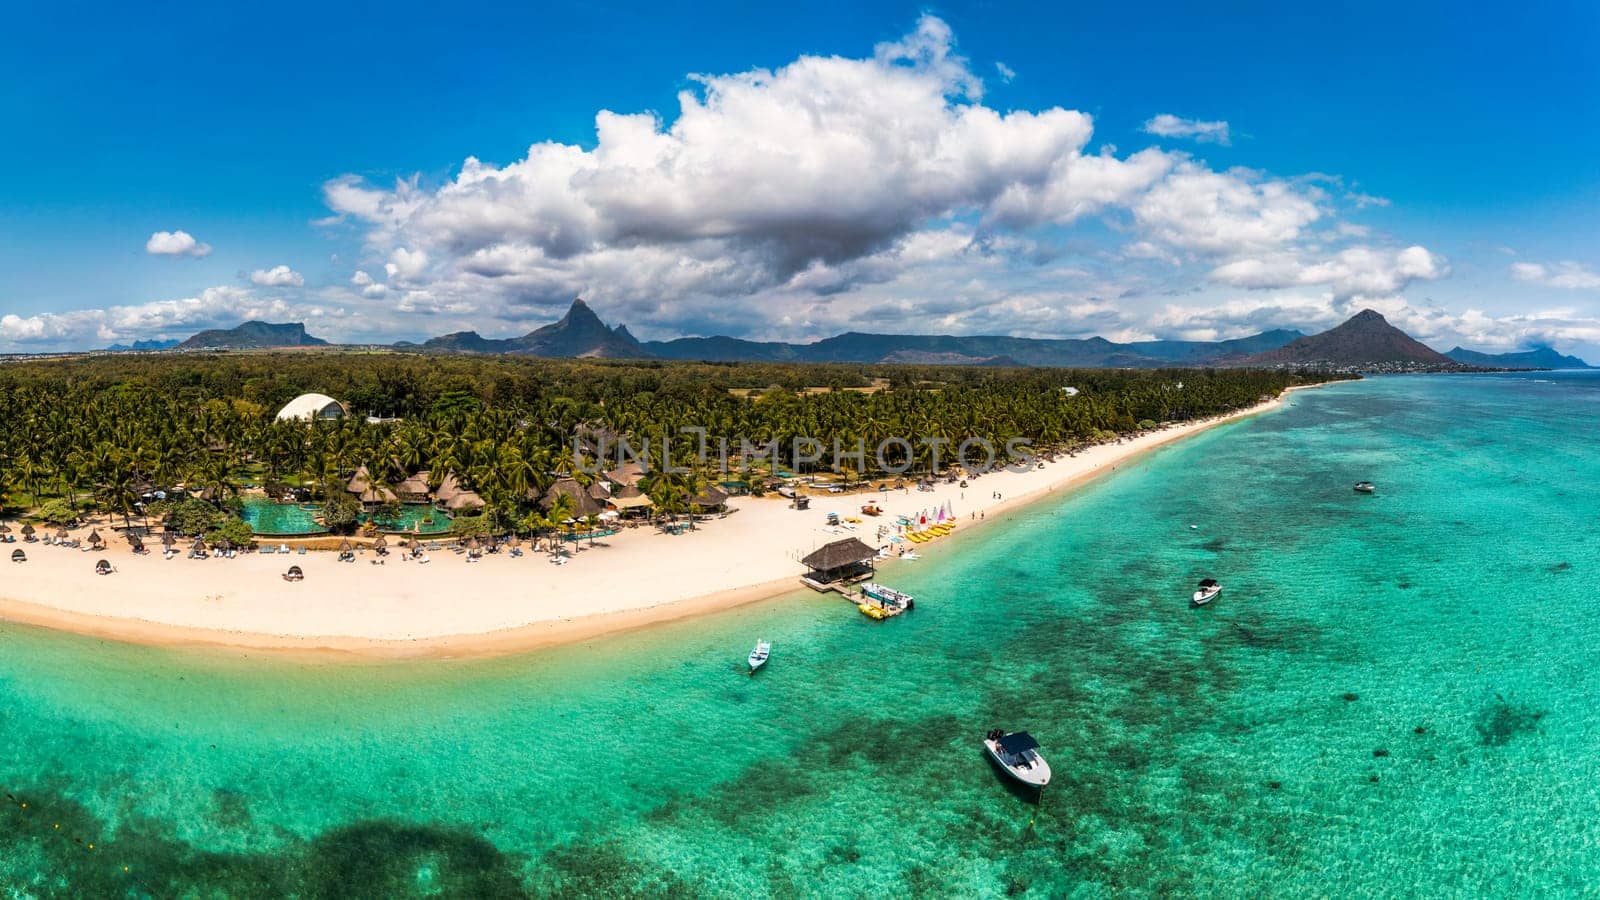 Beautiful Mauritius Island with gorgeous beach Flic en Flac, aerial view from drone. Mauritius, Black River, Flic-en-Flac view of oceanside village beach and luxurious hotel in summer. by DaLiu